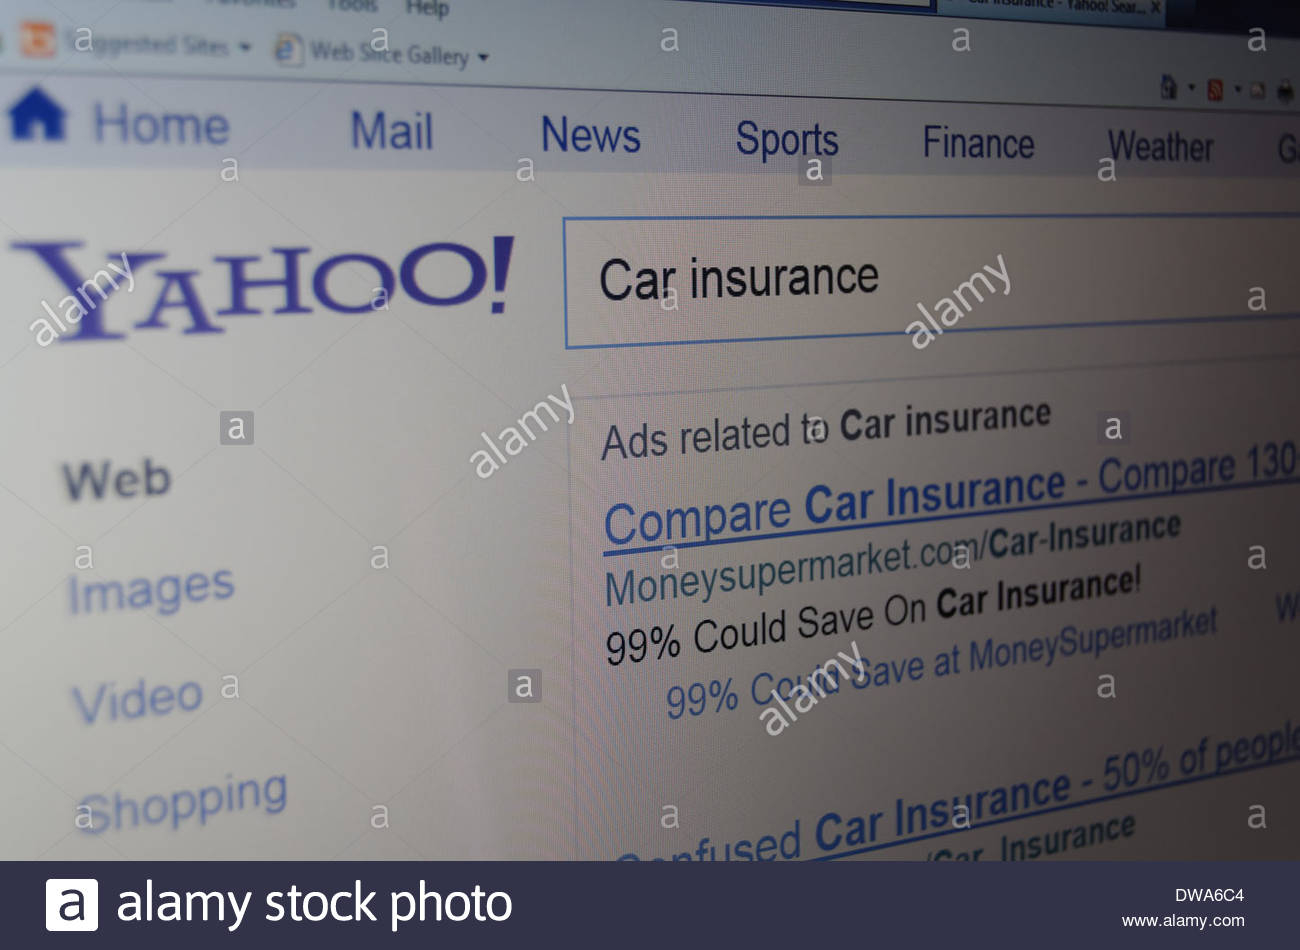 Car Insurance Internet Search Using The Yahoo Search Engine intended for sizing 1300 X 950